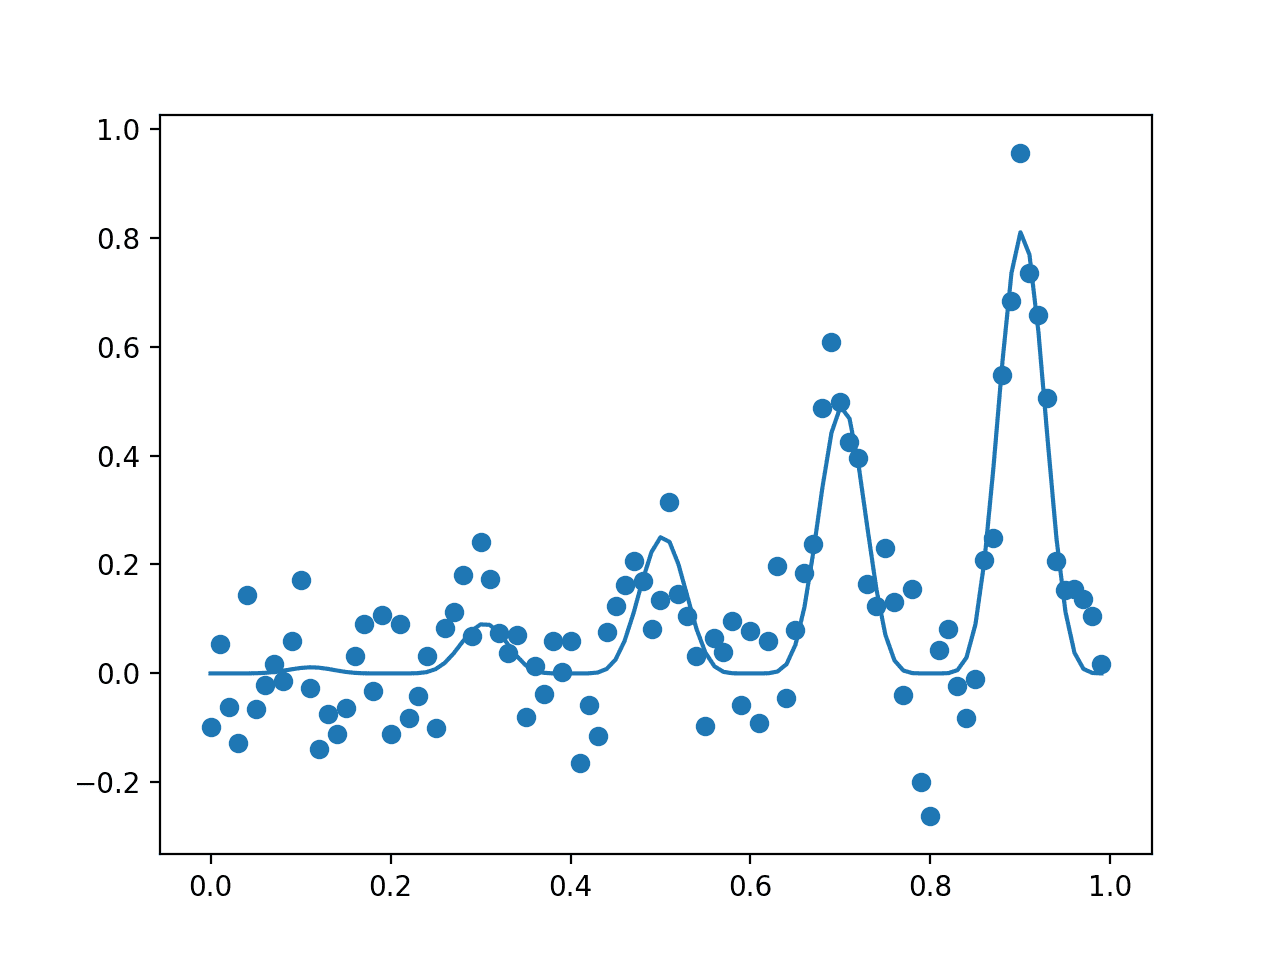 Plot of The Input Samples Evaluated with a Noisy (dots) and Non-Noisy (Line) Objective Function